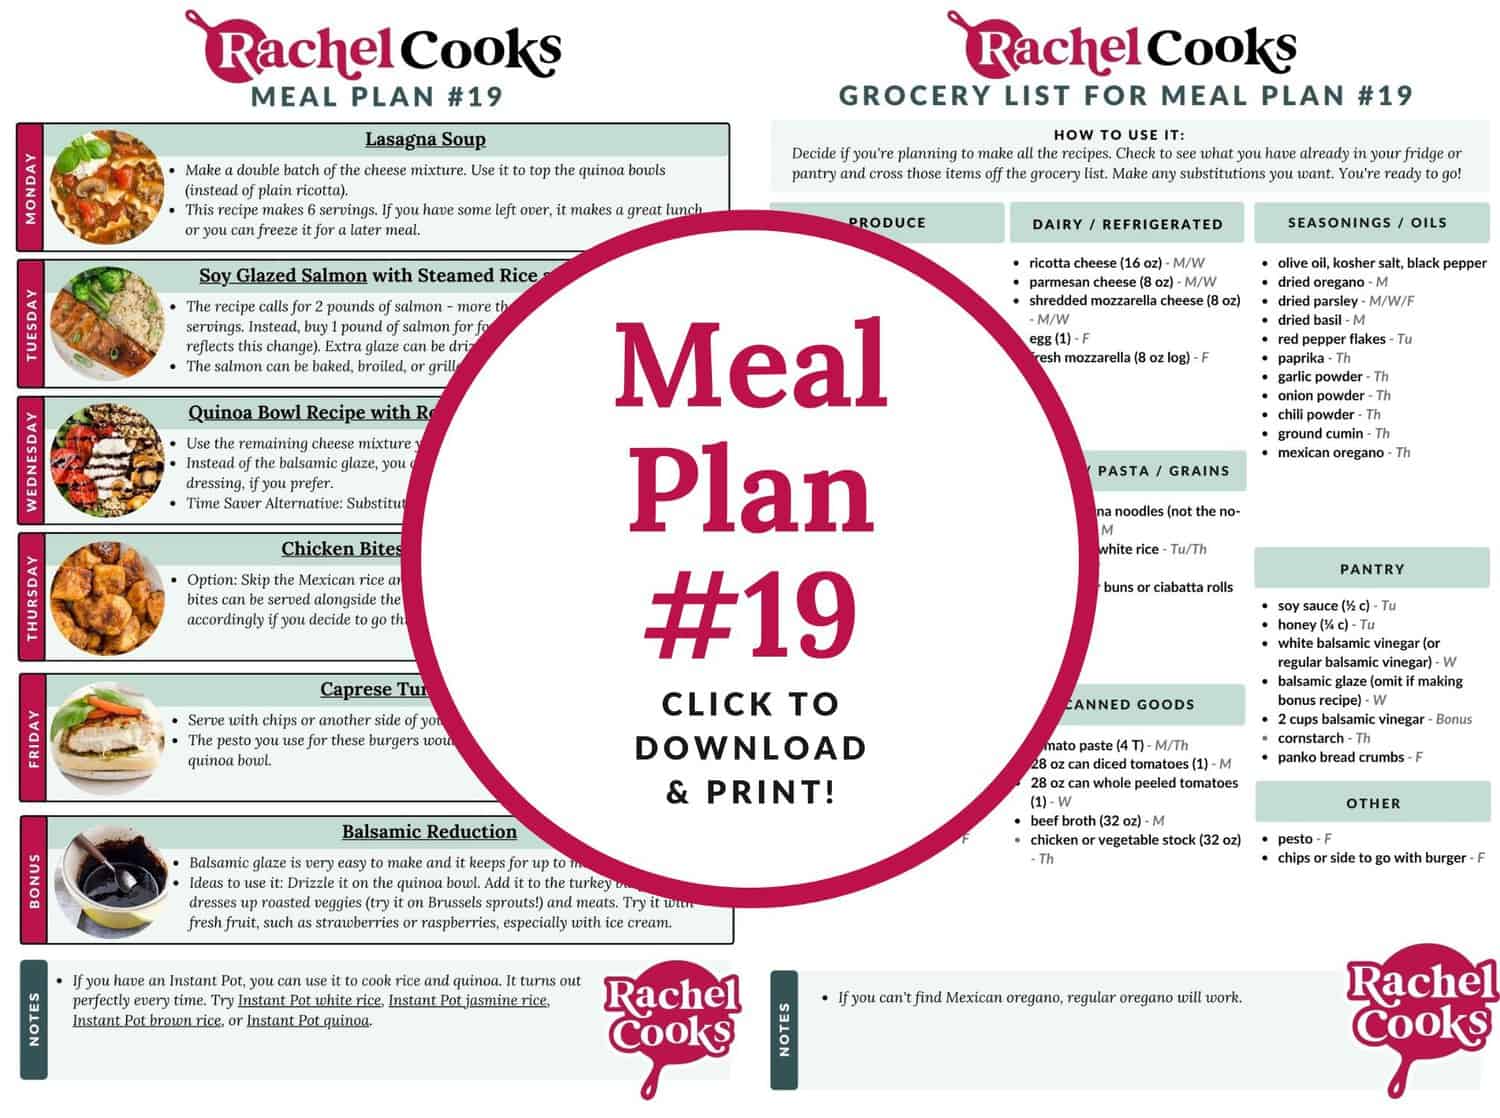 Meal plan 19 preview image.